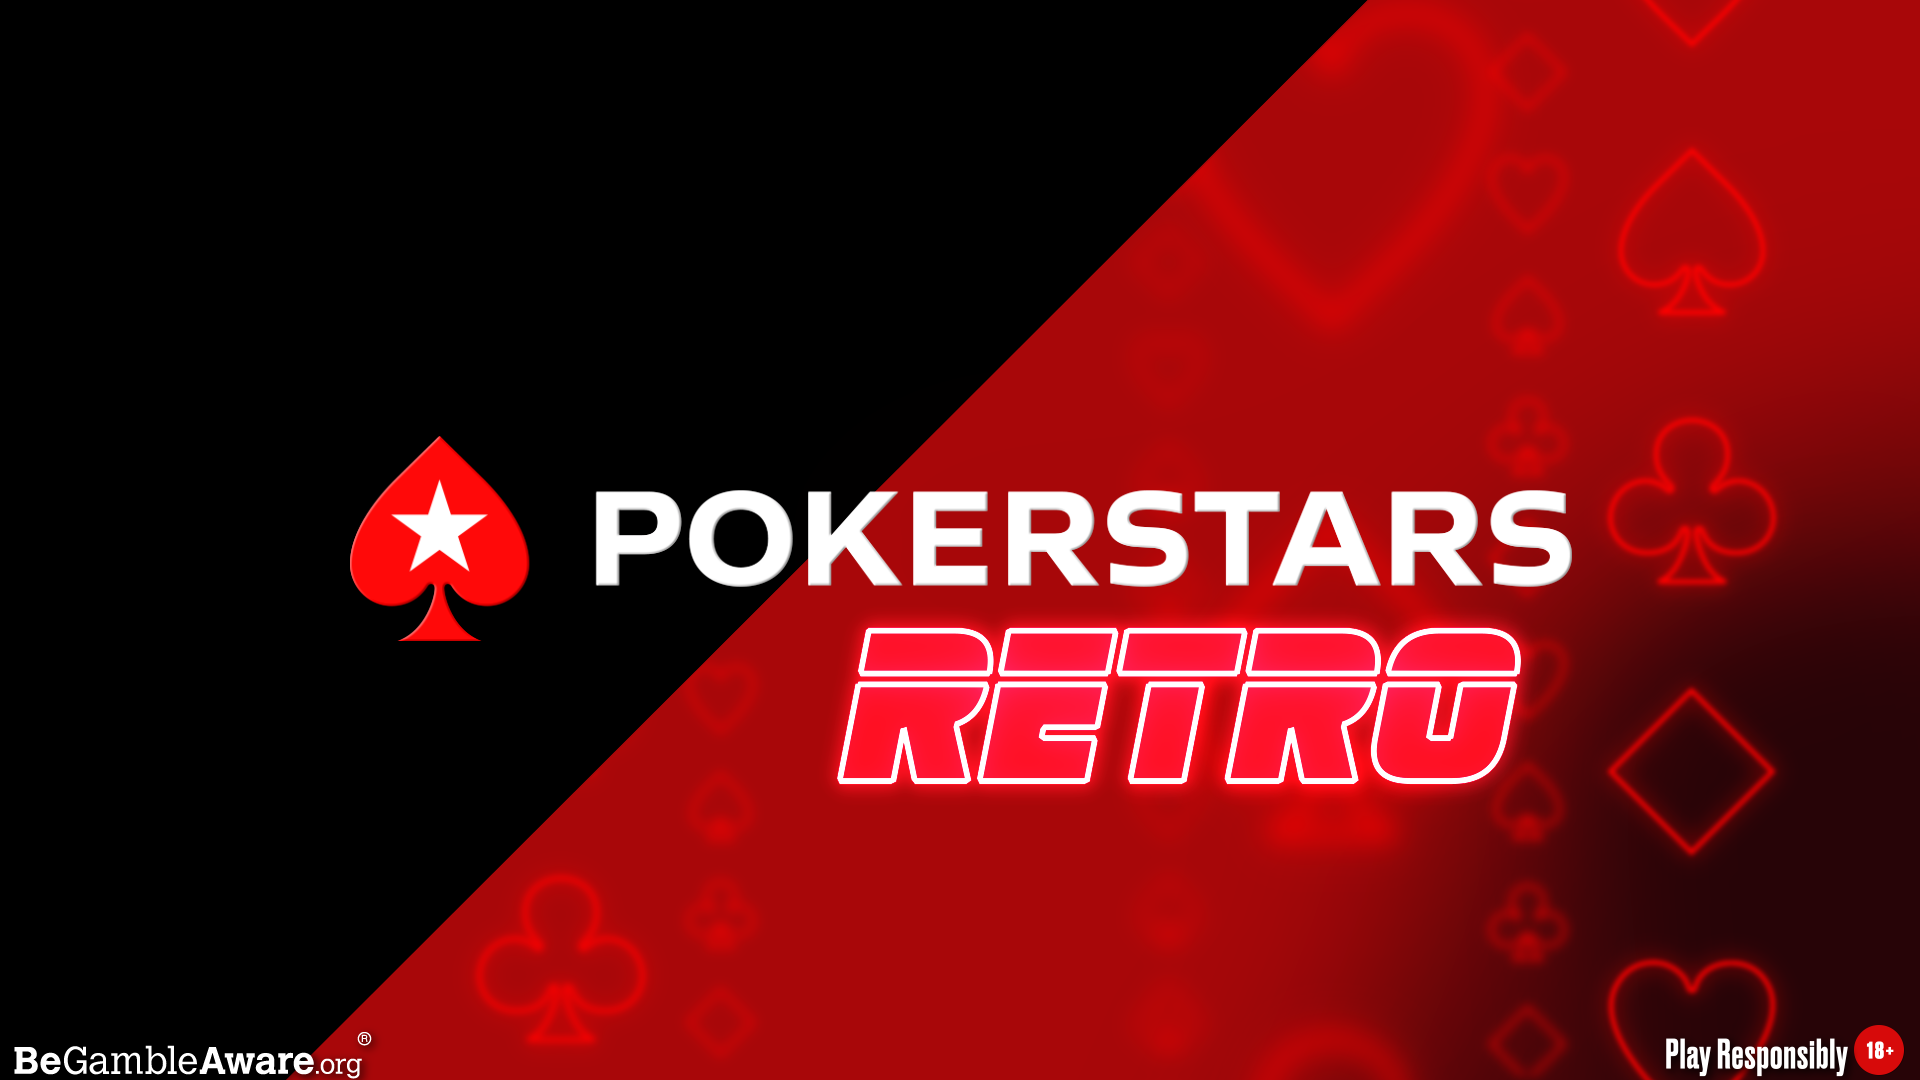 Starting today: Dive into the archives with PokerStars Retro